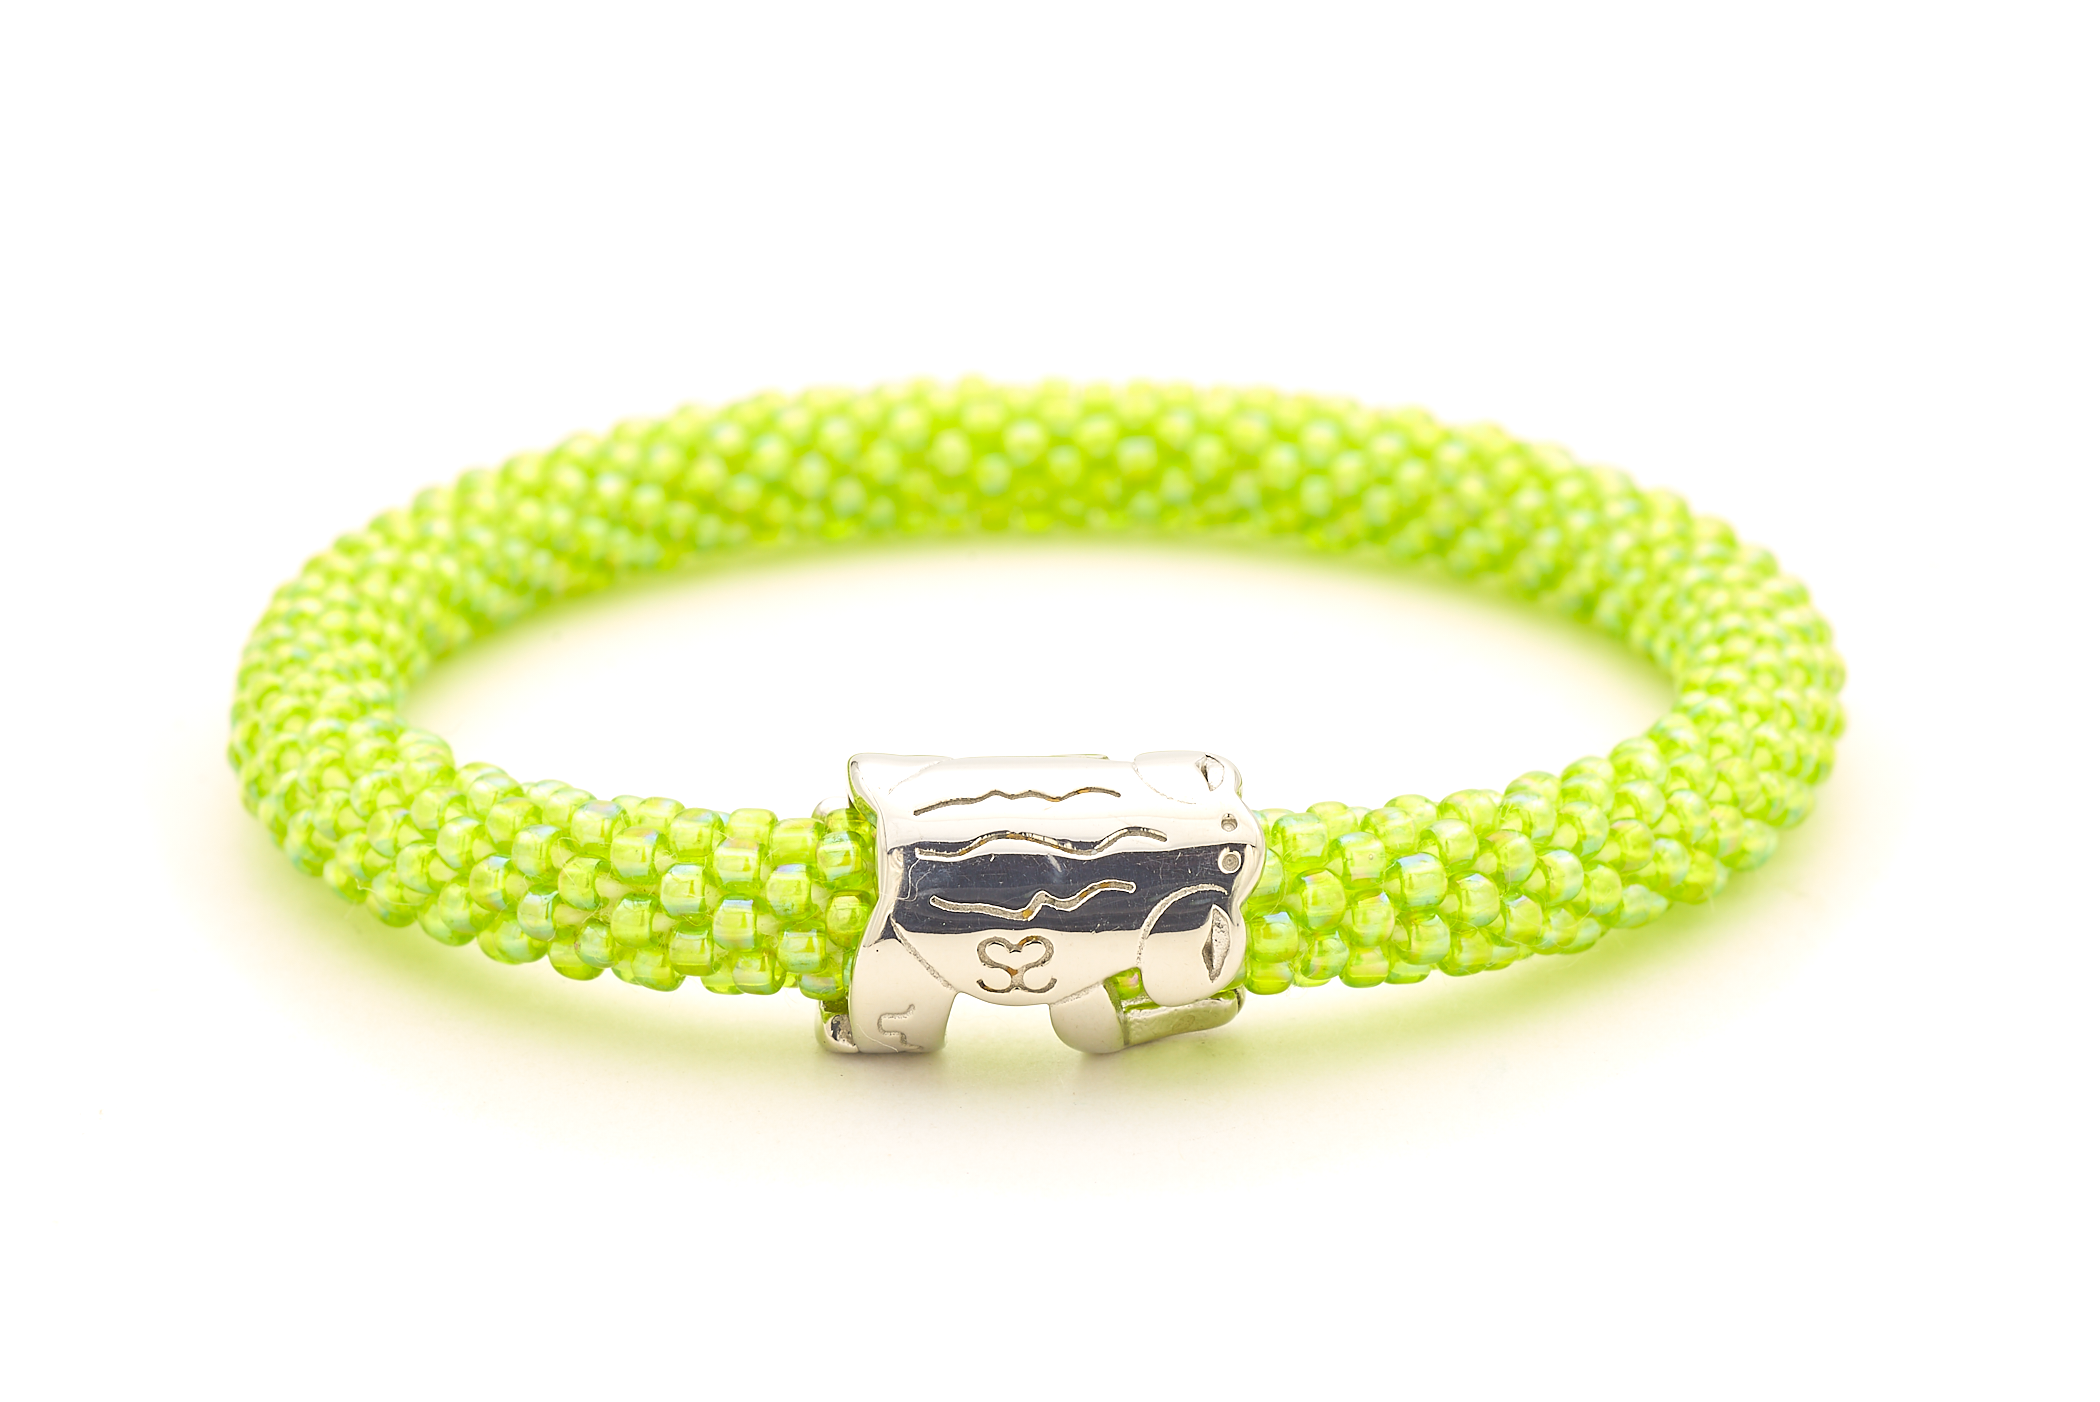 Sashka Co. Extended 8" Bracelet Green / with Silver Charm Frog Charm Bracelet - Extended 8"